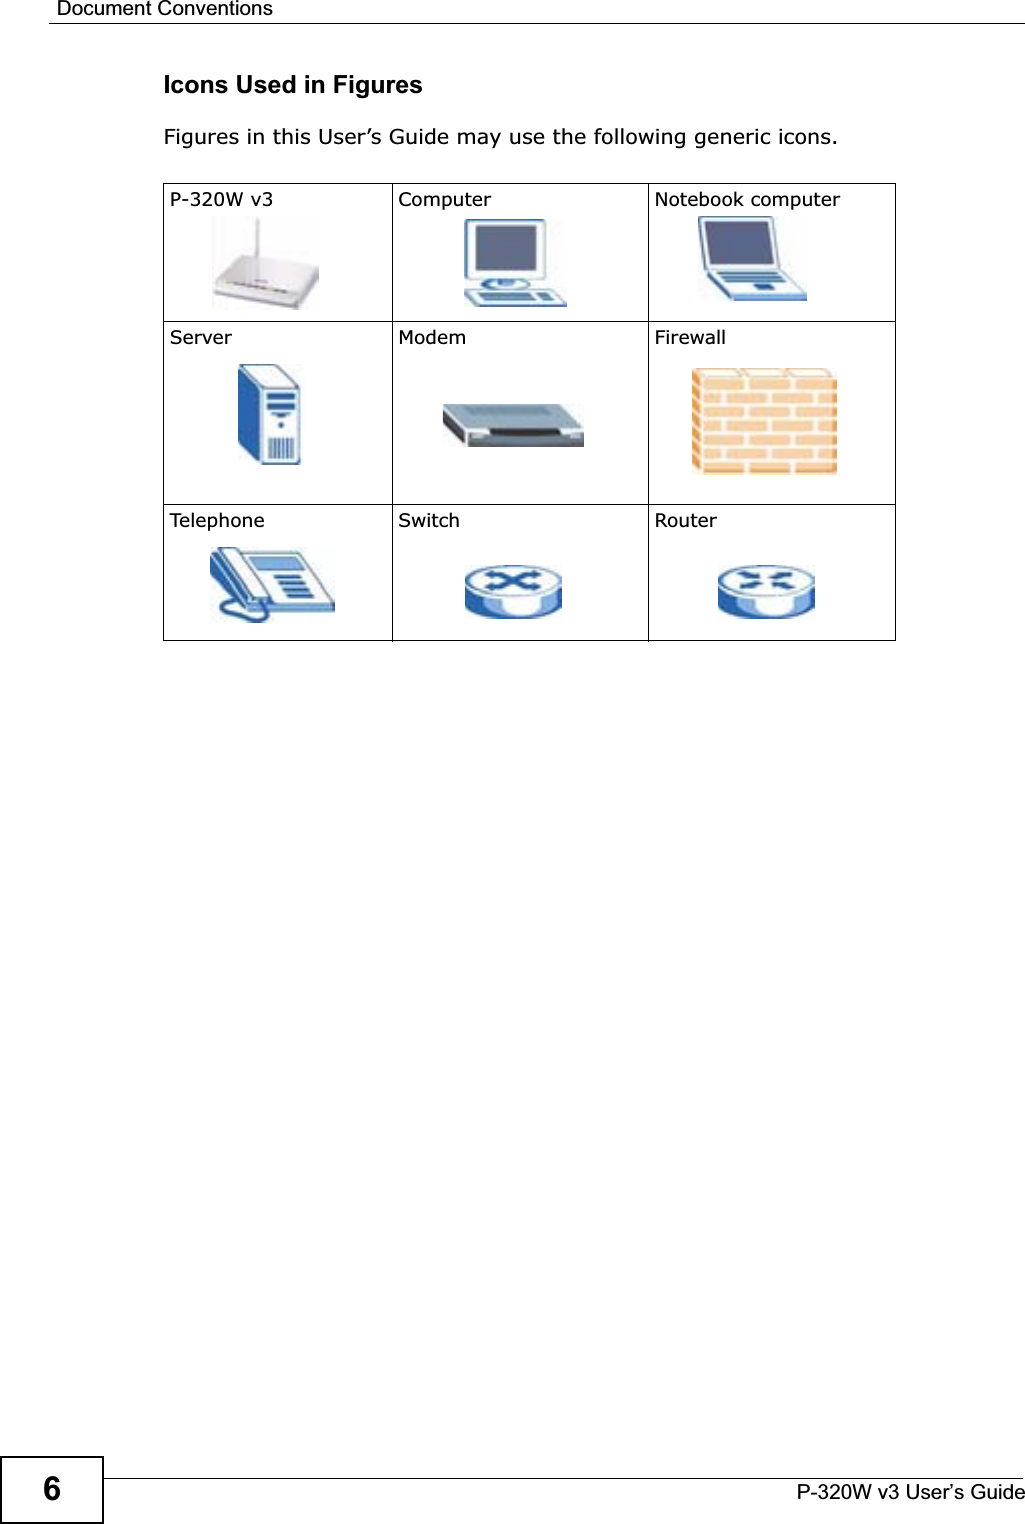 Document ConventionsP-320W v3 User’s Guide6Icons Used in FiguresFigures in this User’s Guide may use the following generic icons.P-320W v3 Computer Notebook computerServer Modem FirewallTelephone Switch Router